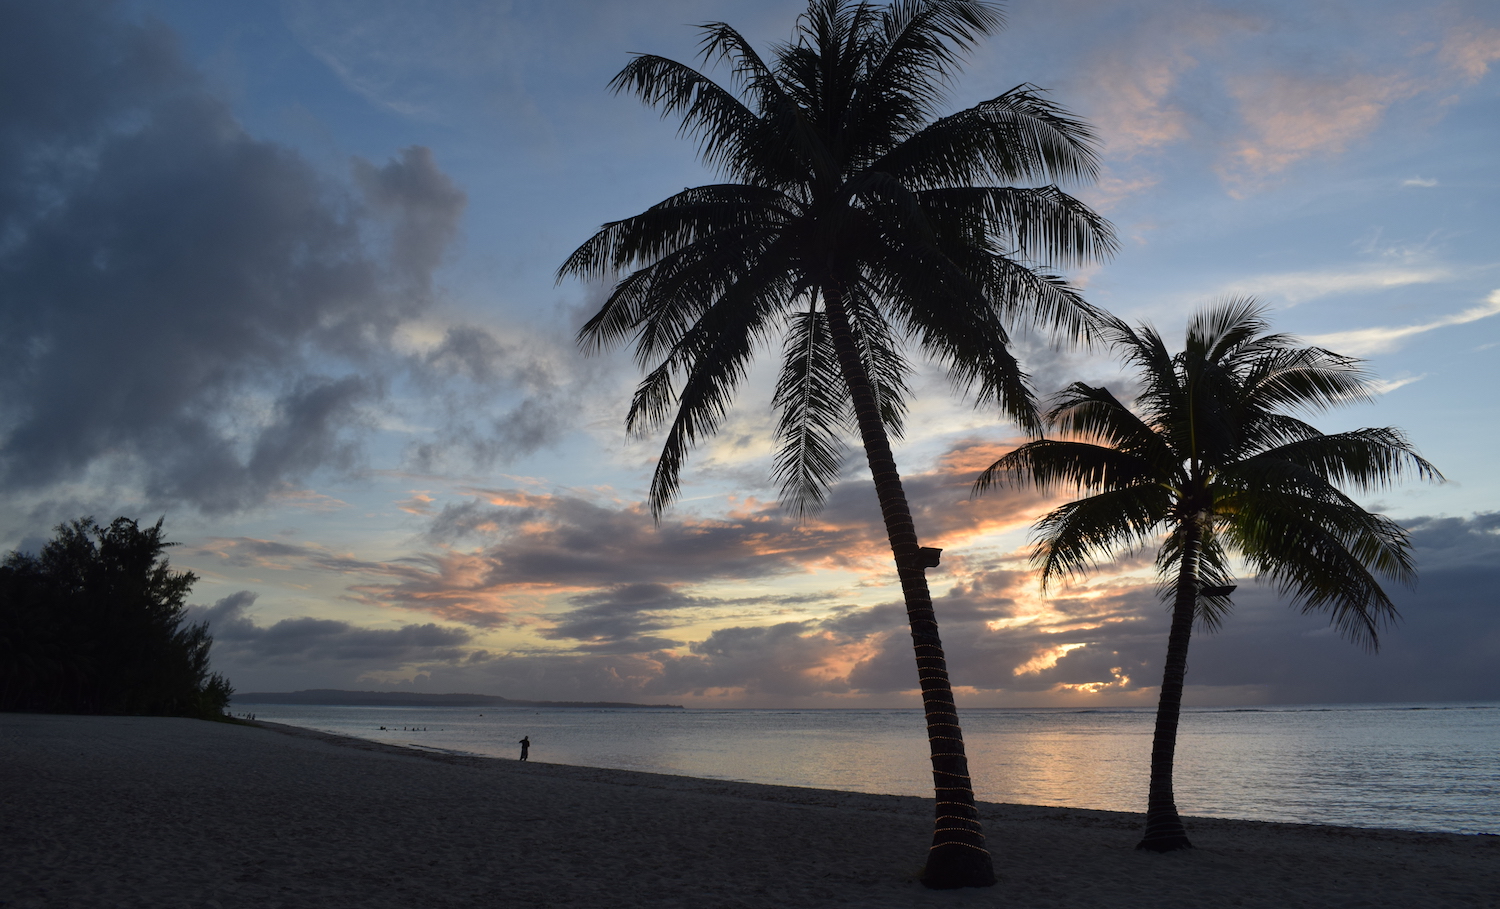 Sunset on beach with palm trees